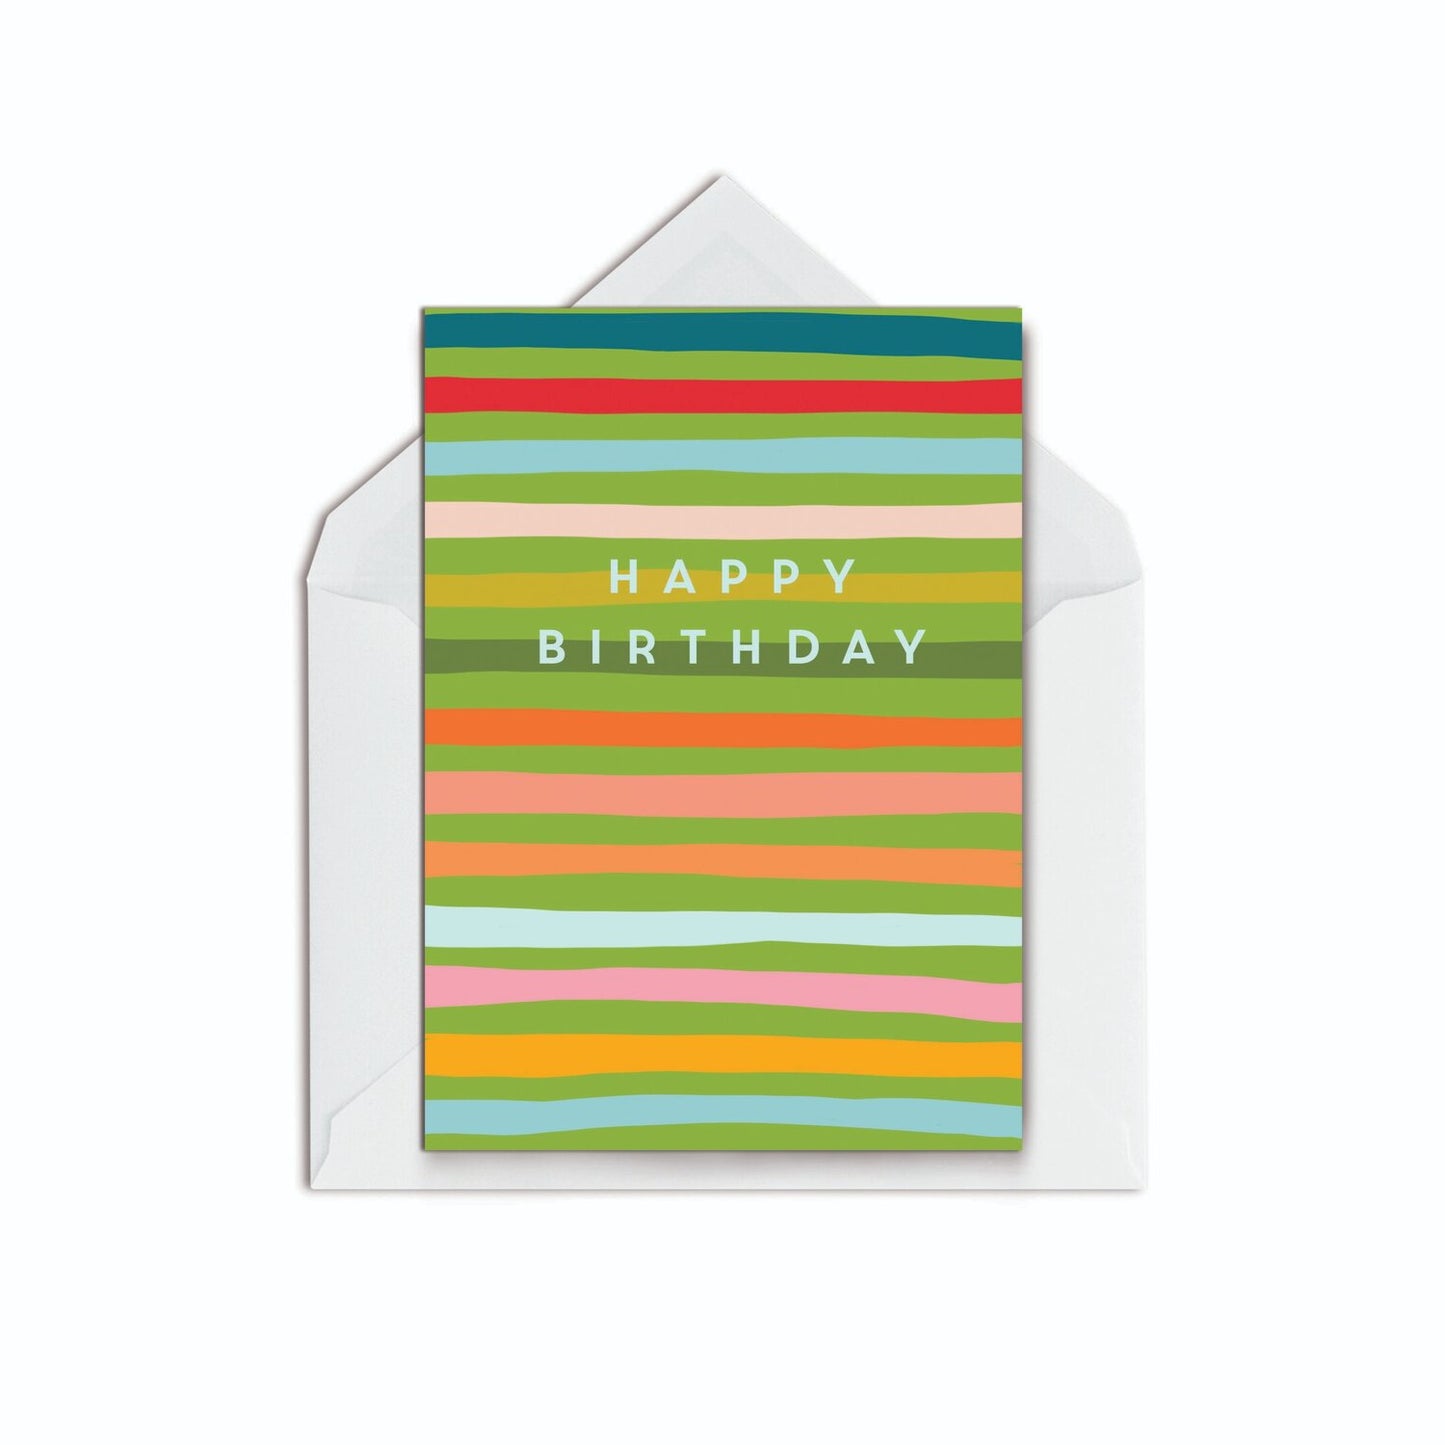 10 Birthday Cards - The Paper People Greeting Cards